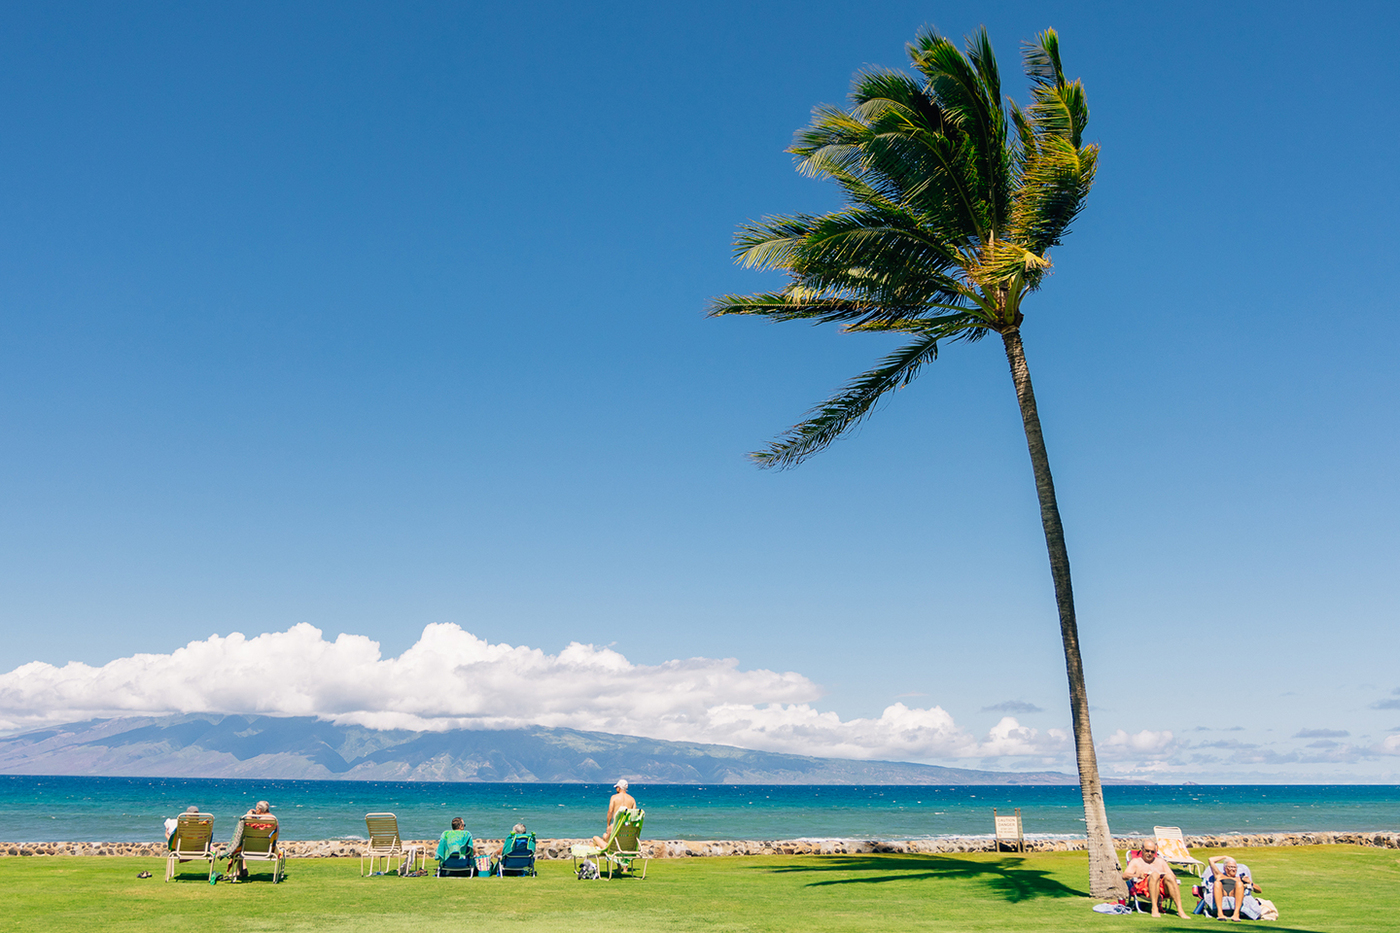 People relaxing on resort lawn with ocean and neighbor island views